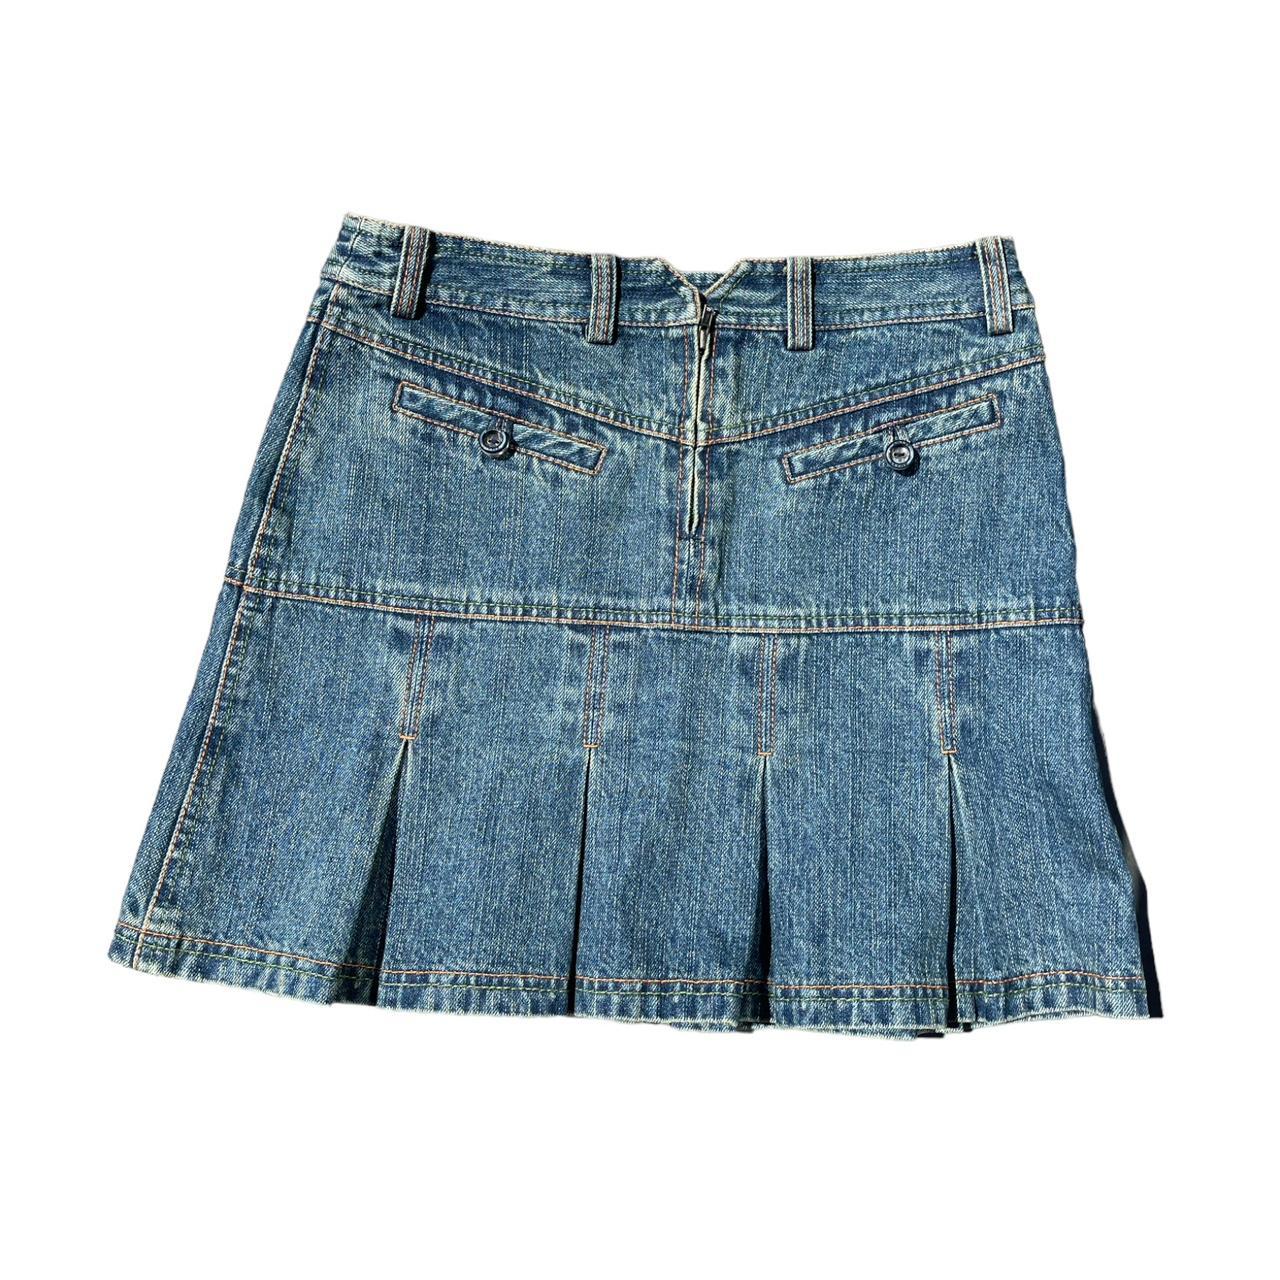 Y2k pleated denim skirt features a intentional... - Depop